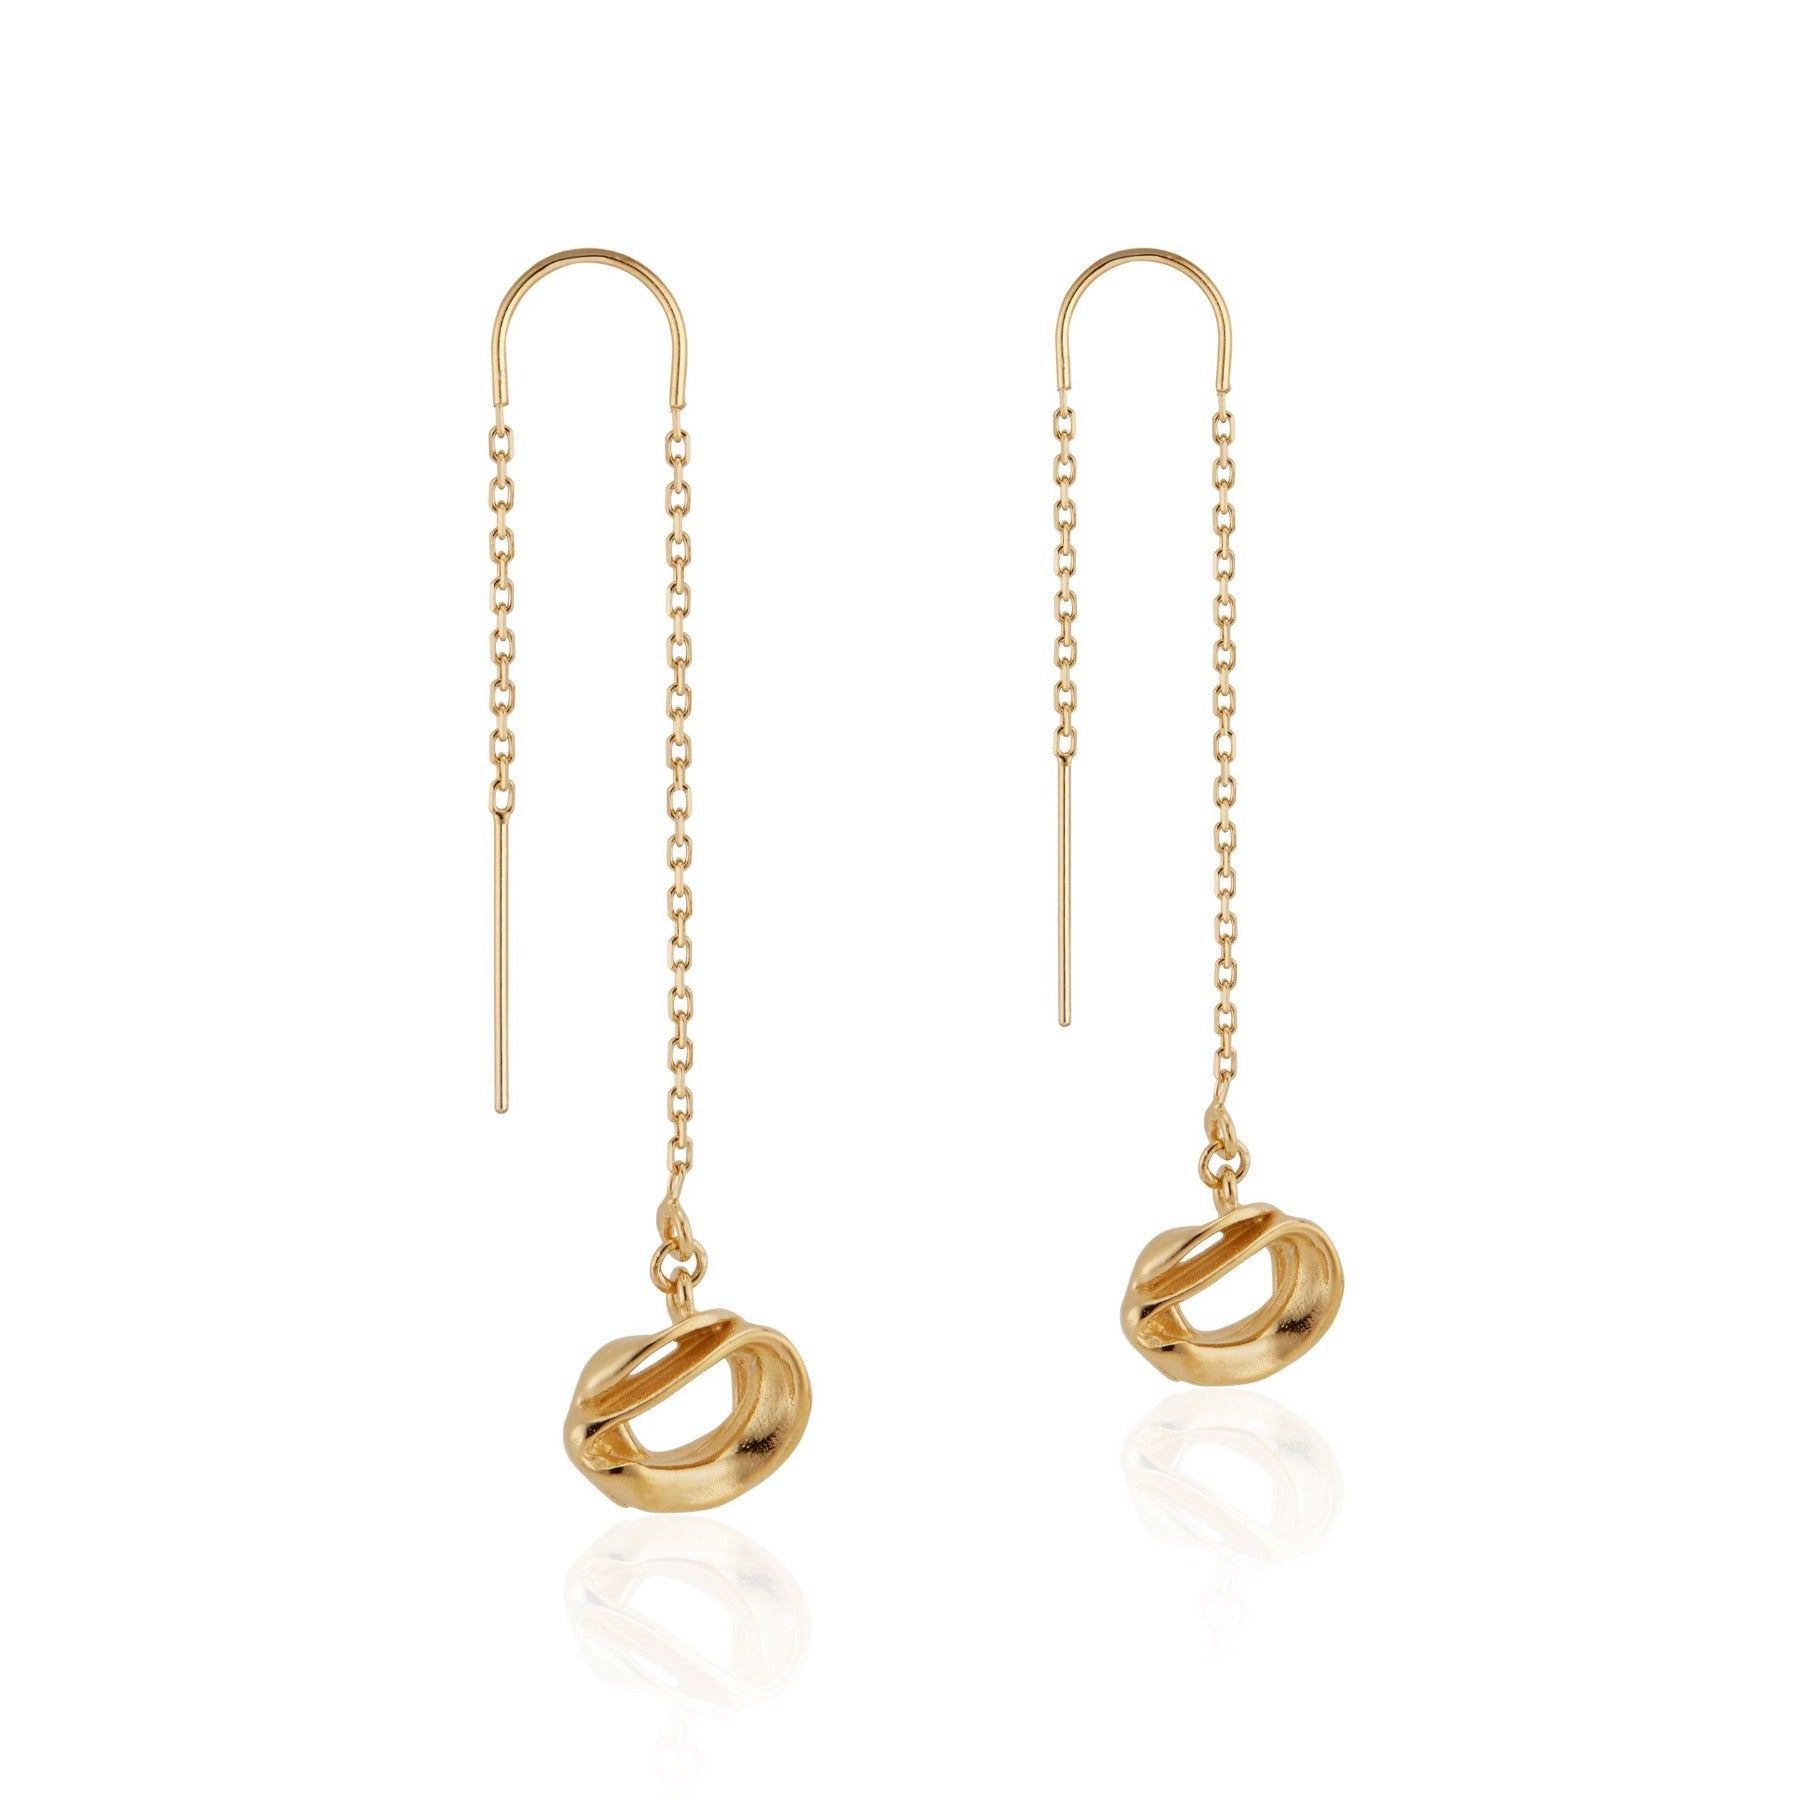 Organic abstract oval circle threader dangling earrings in 18k gold vermeil.